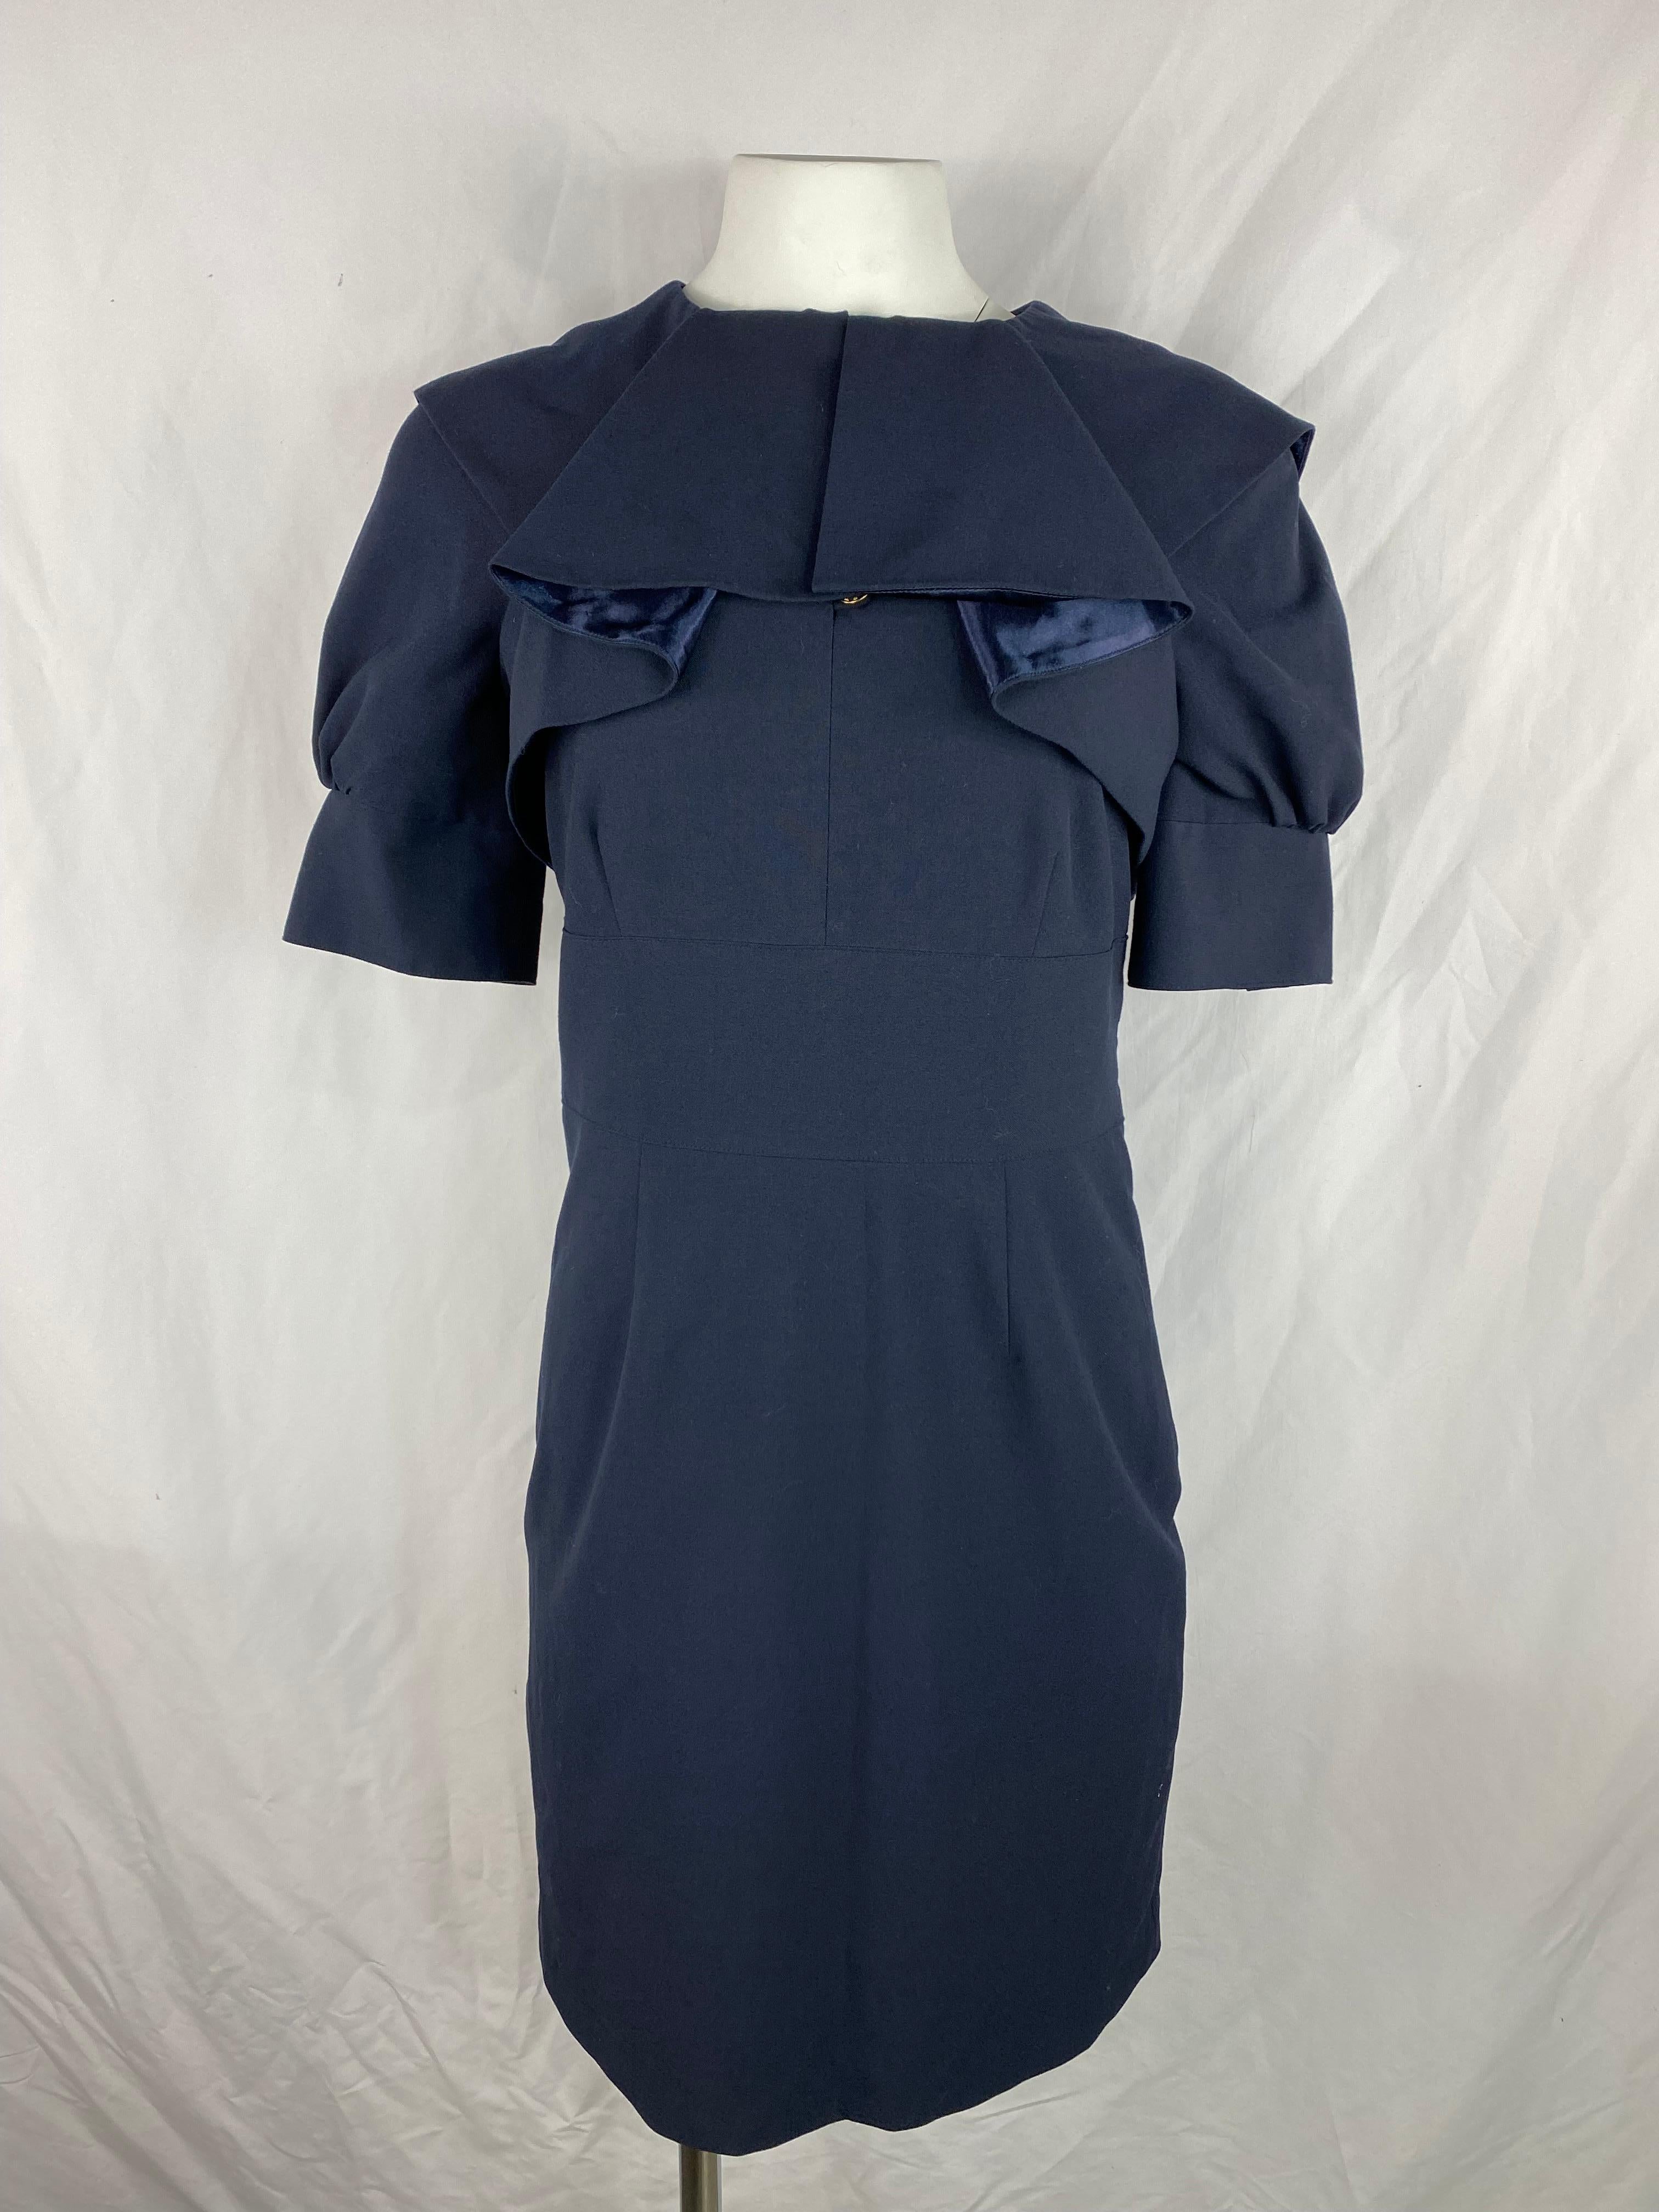 Walter Navy Mini Dress, Size 4 In Excellent Condition For Sale In Beverly Hills, CA